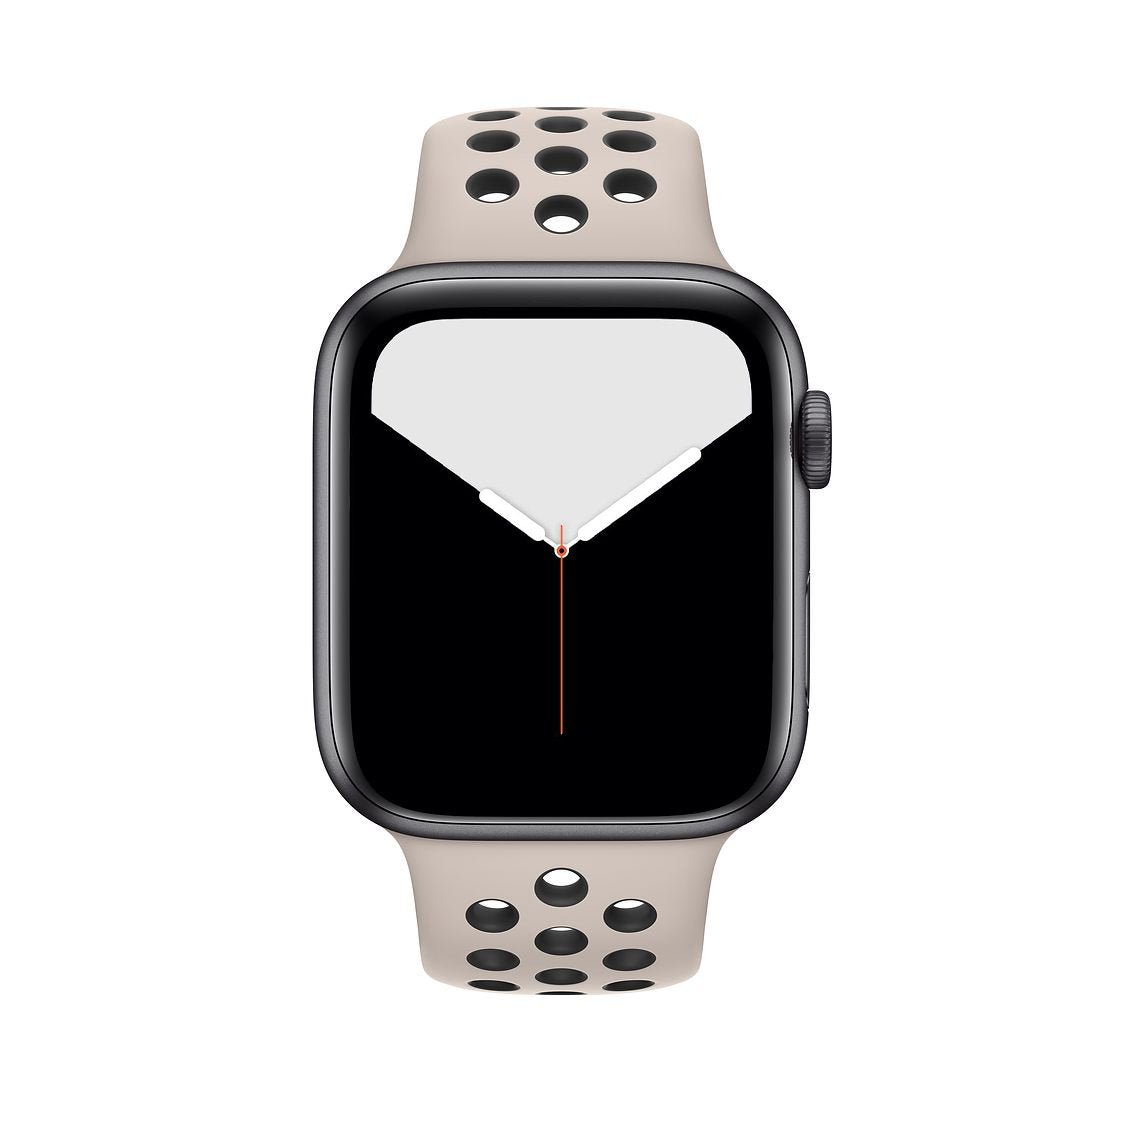 Desert Sand/Black Silicone Sport Strap for Apple Watch Silicone Bands   Accessories Gifts UK